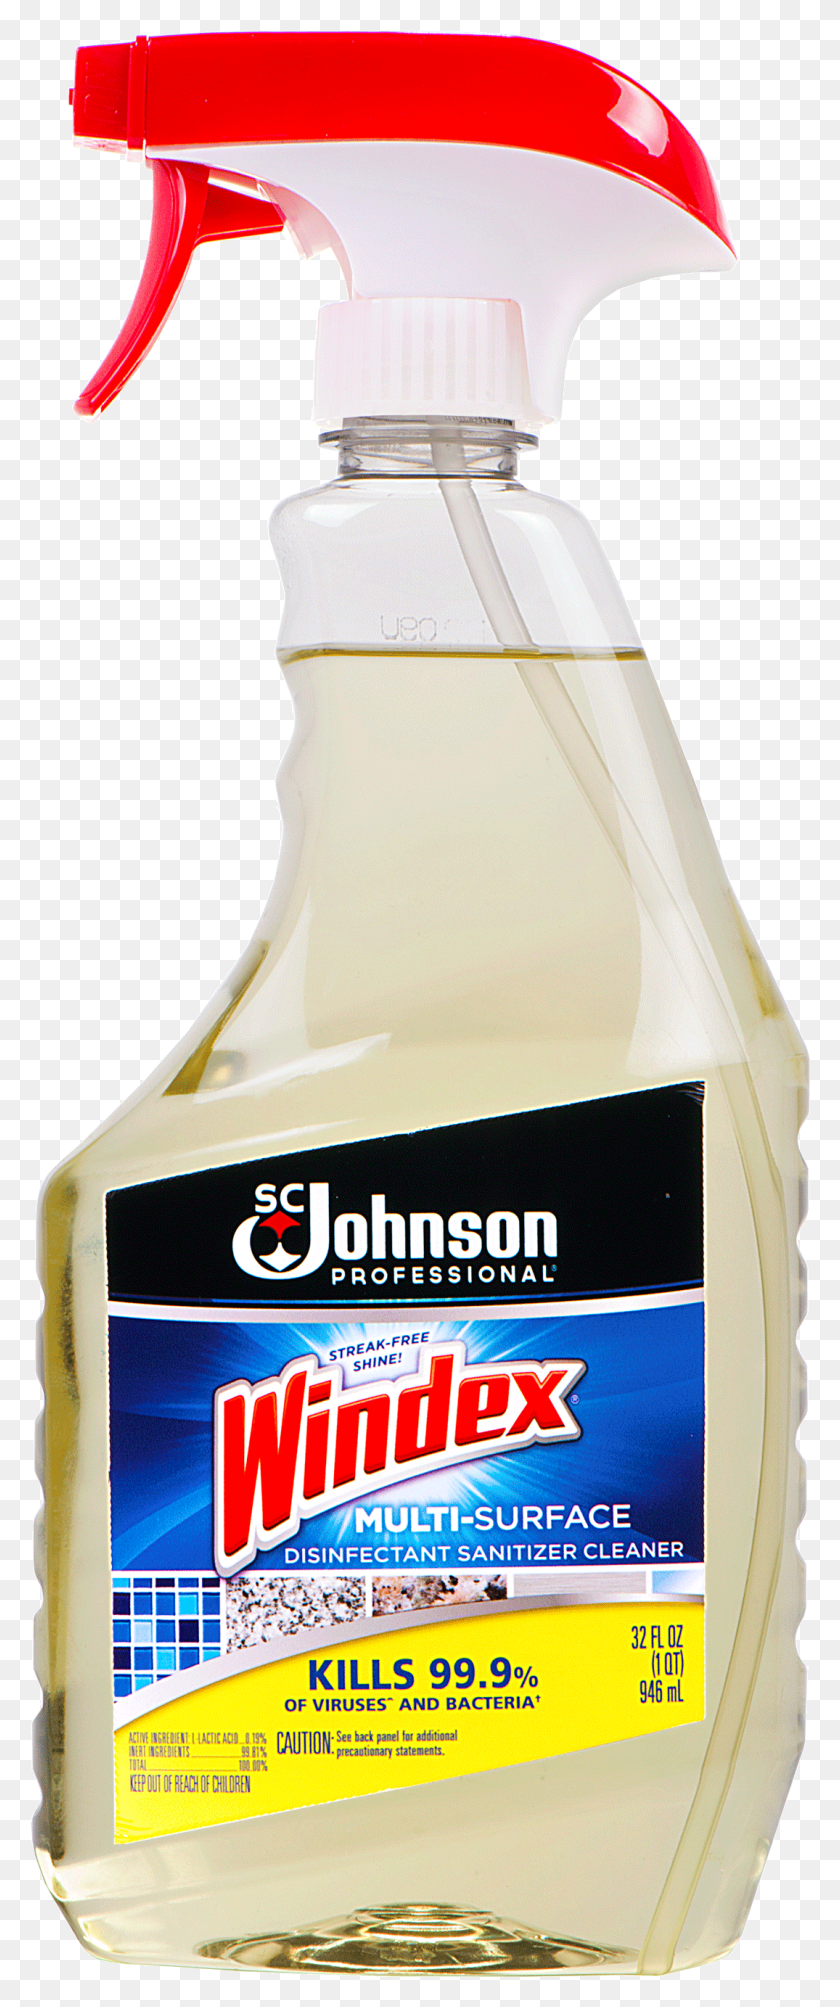 1075x2684 Windex Multi Surface Disinfectant Cleaners Чистые Зеркала, Бутылка, Еда, Этикетка Hd Png Скачать